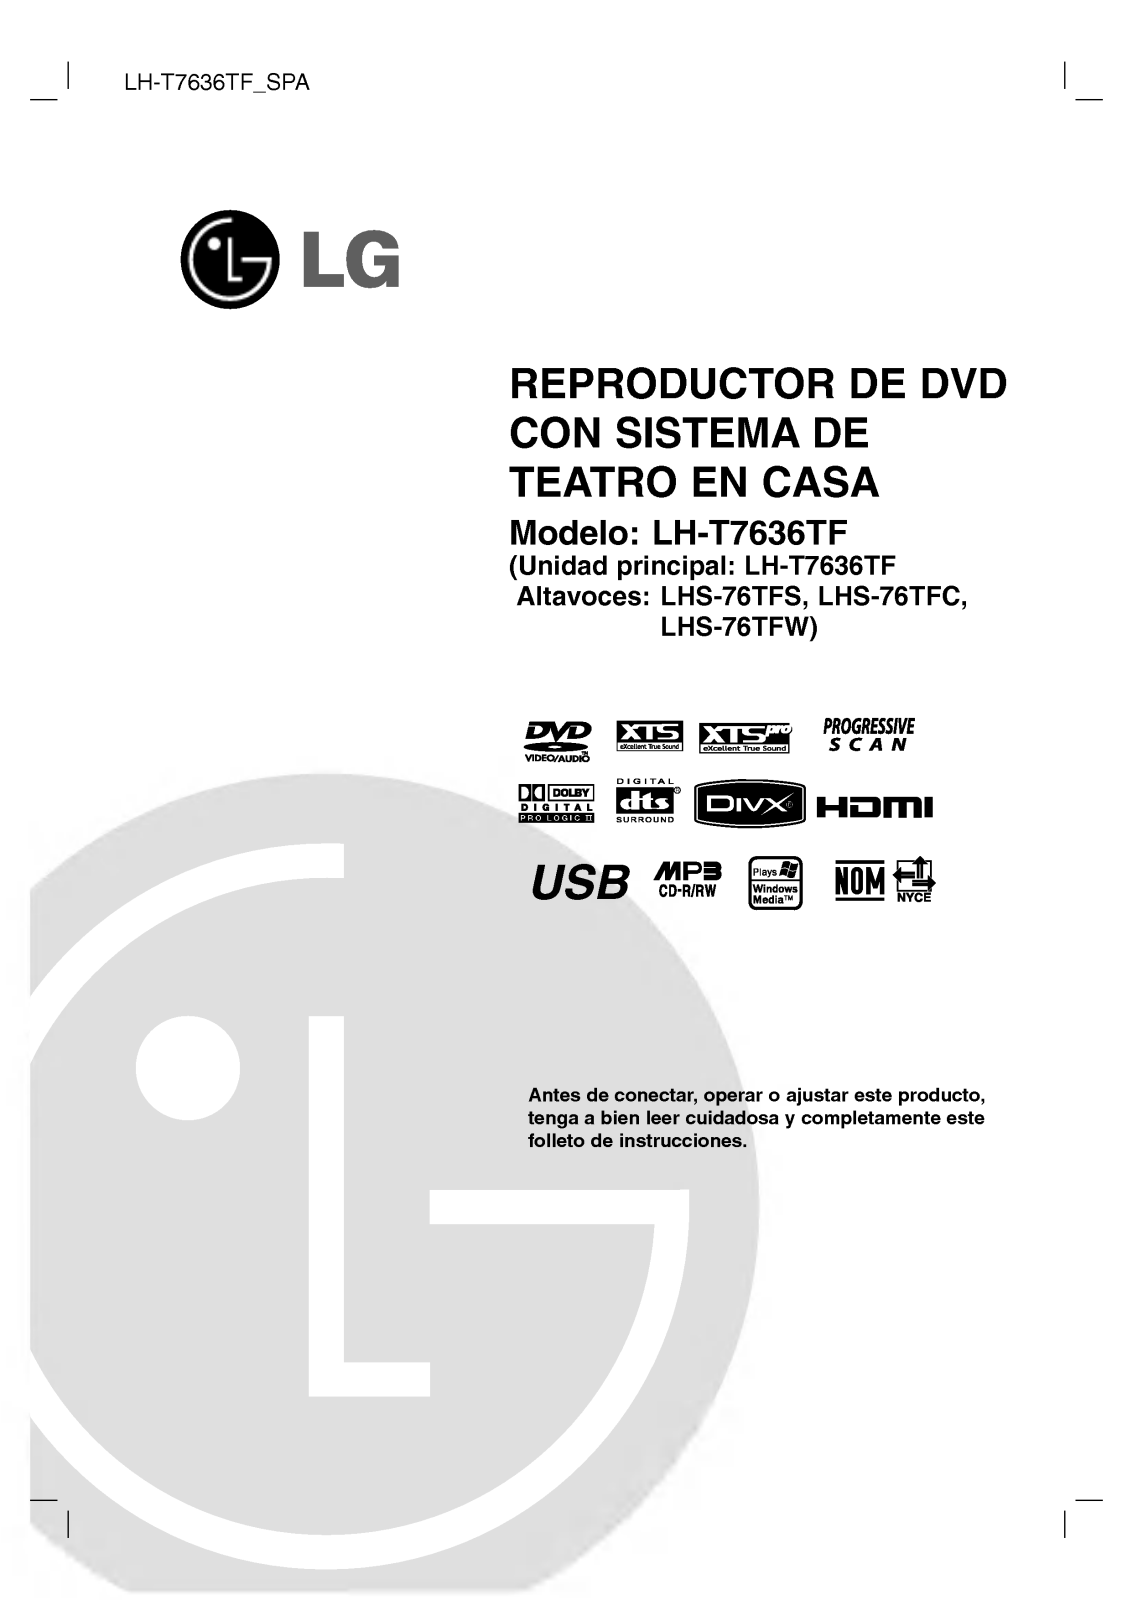 LG LH-T7636TF Owner's Manual